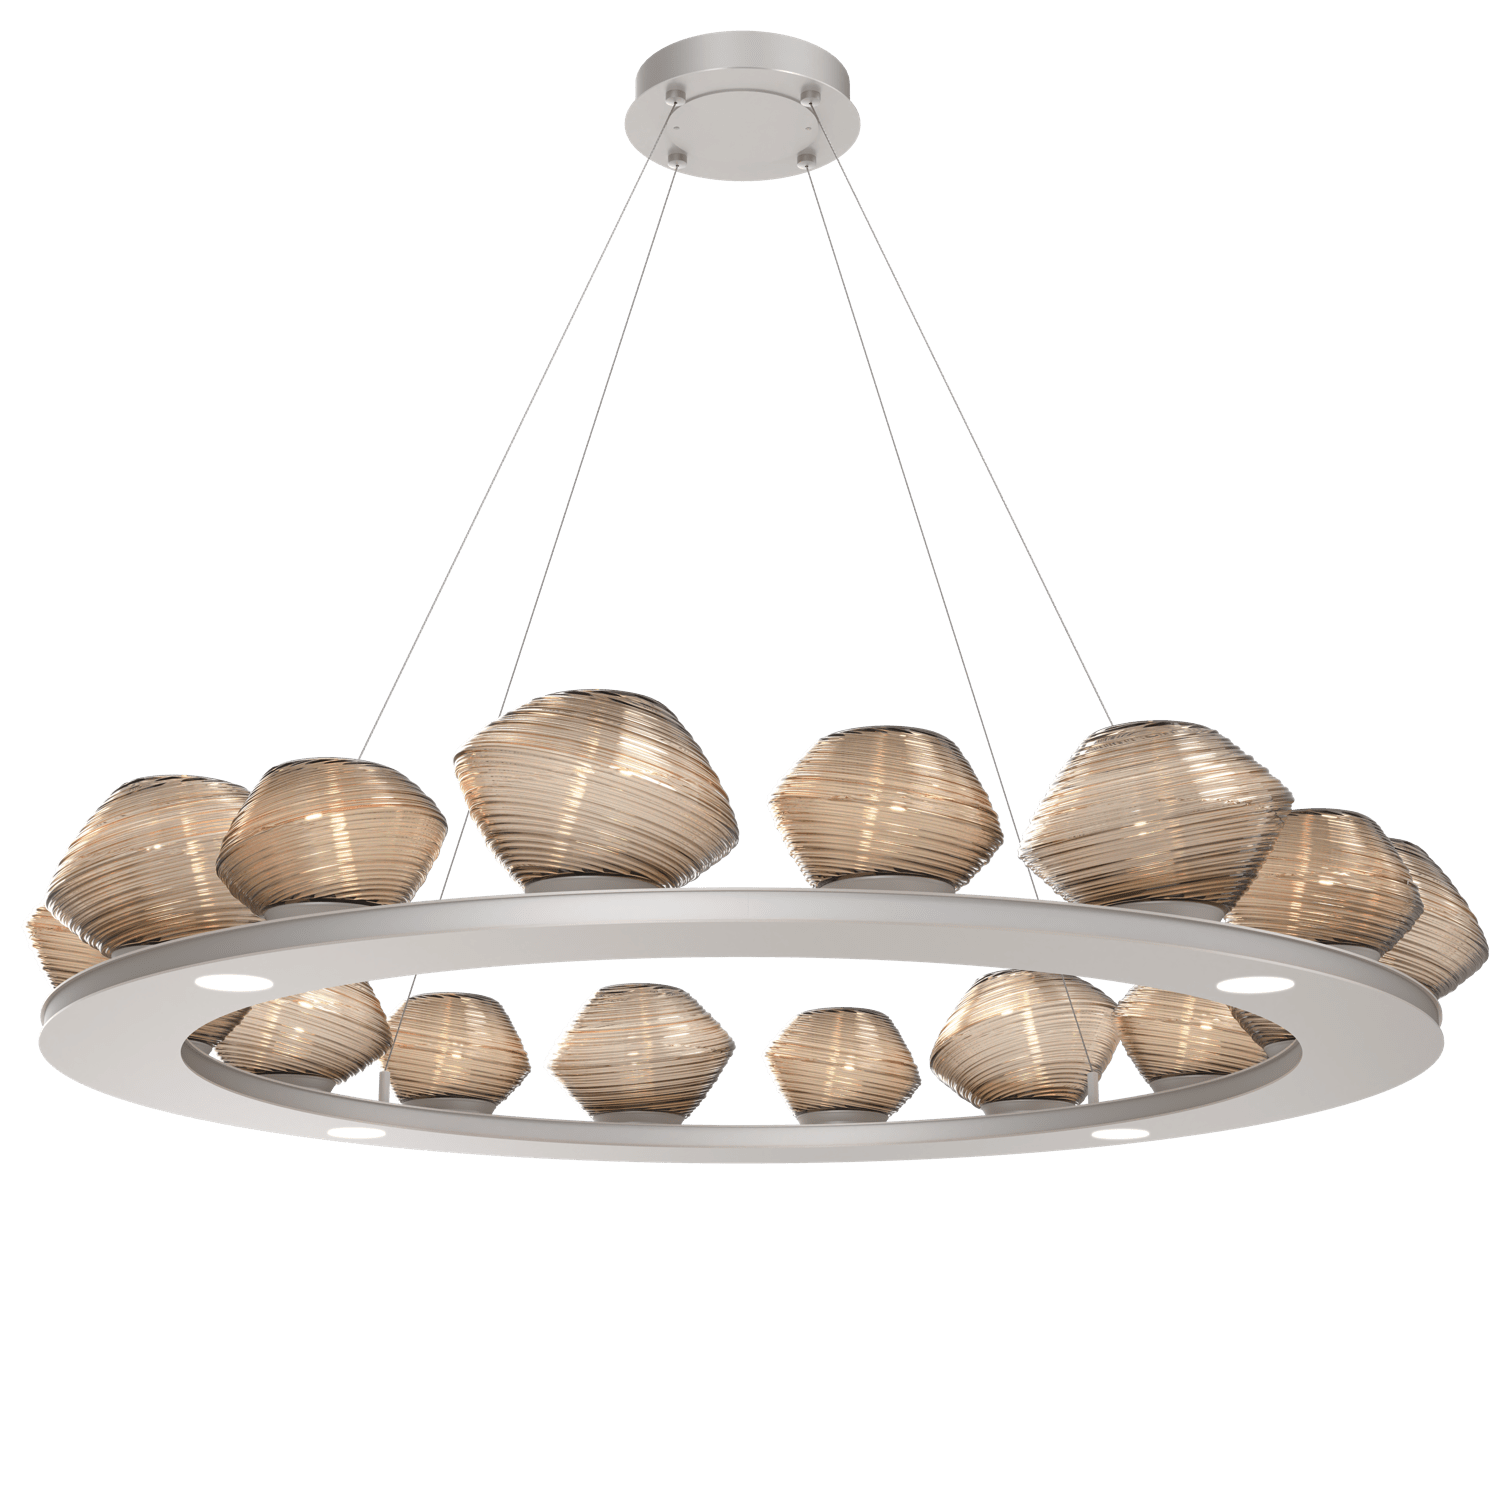 CHB0089-0D-BS-B-Hammerton-Studio-Mesa-48-inch-ring-chandelier-with-metallic-beige-silver-finish-and-bronze-blown-glass-shades-and-LED-lamping